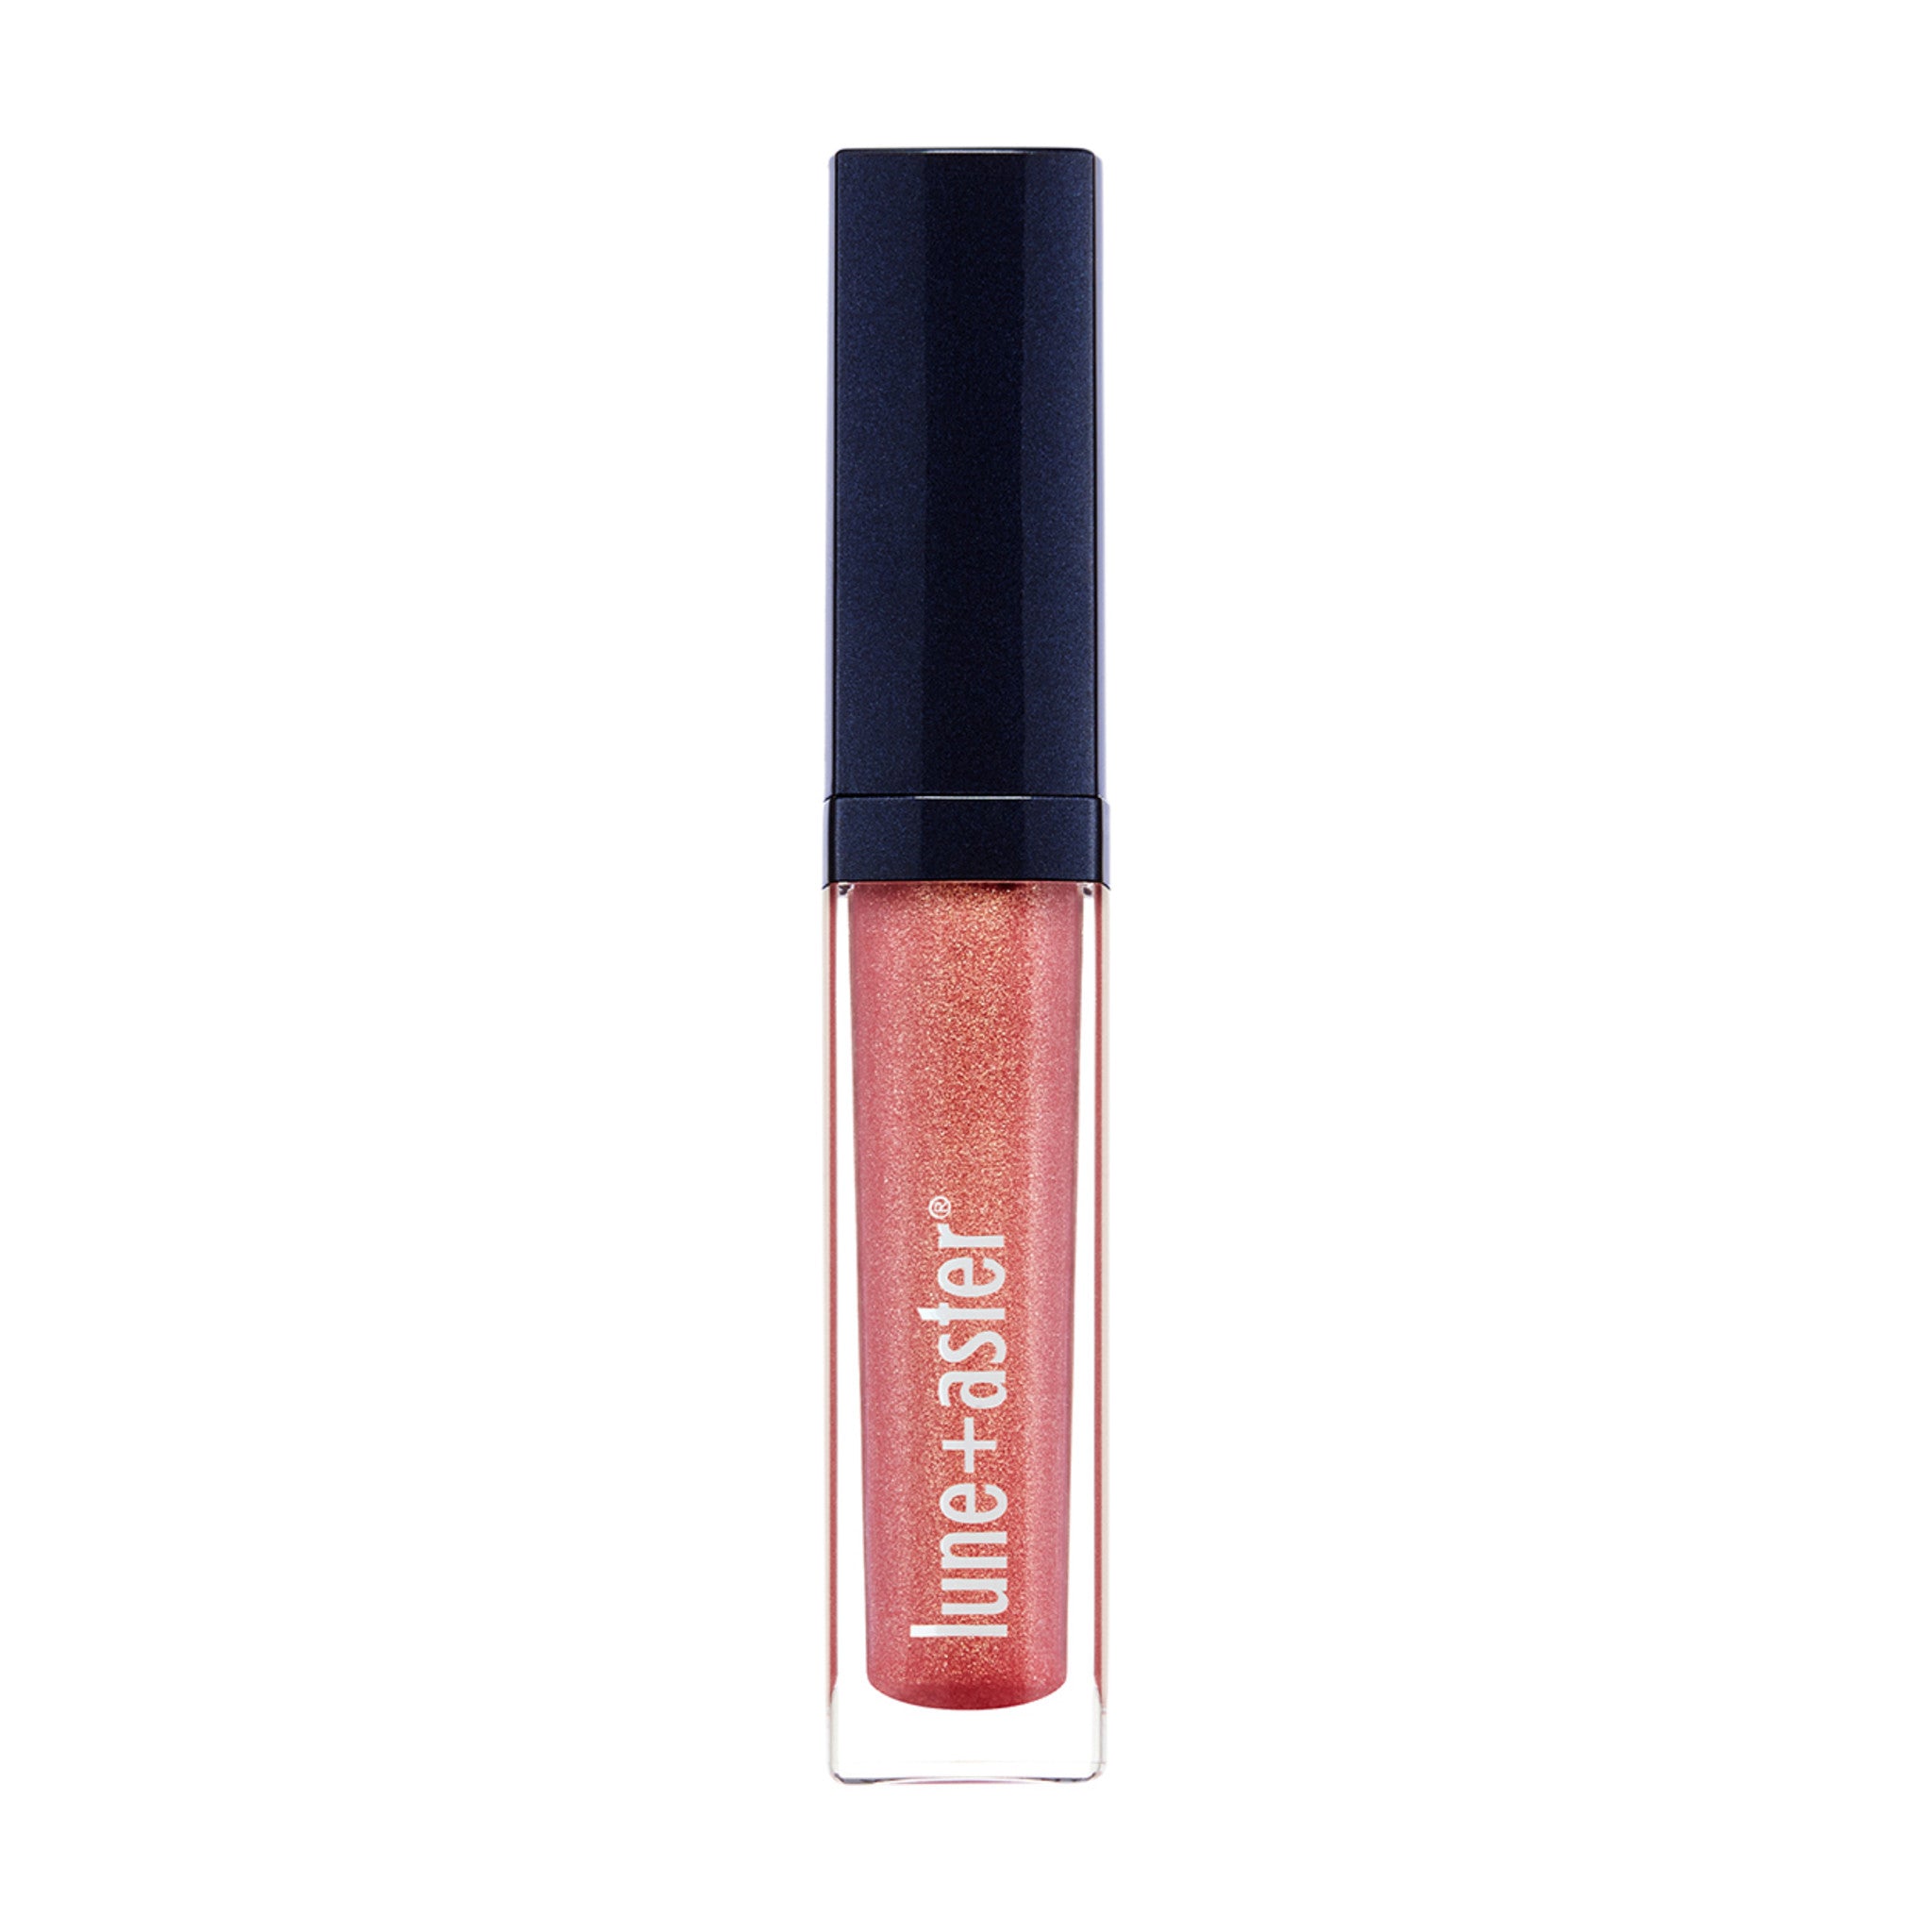 Lune+Aster Vitamin C+E Lip Gloss Color/Shade variant: Changemaker main image. This product is in the color coral